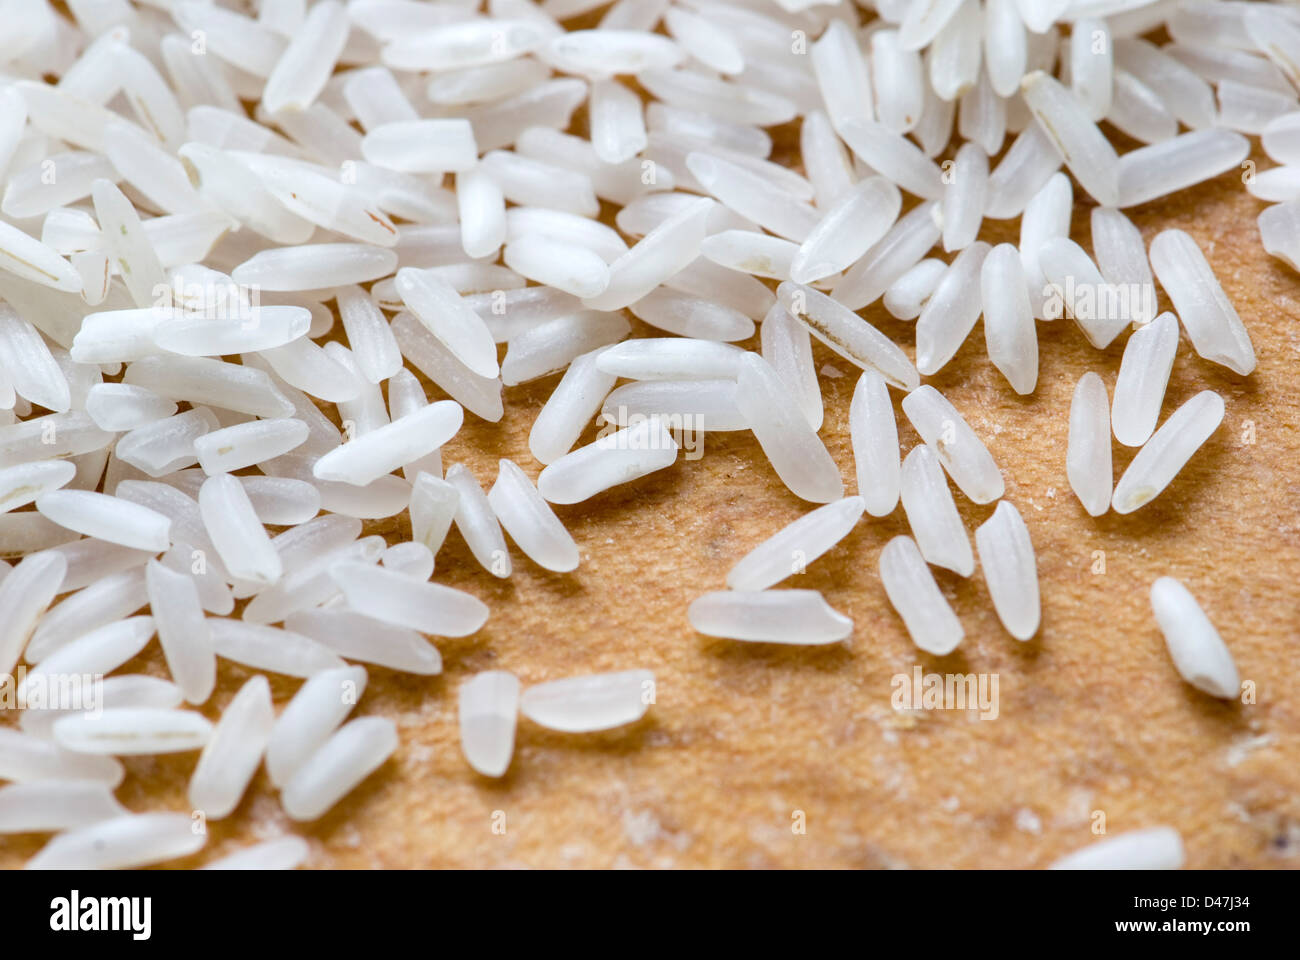 Close up of scattered white rice Stock Photo